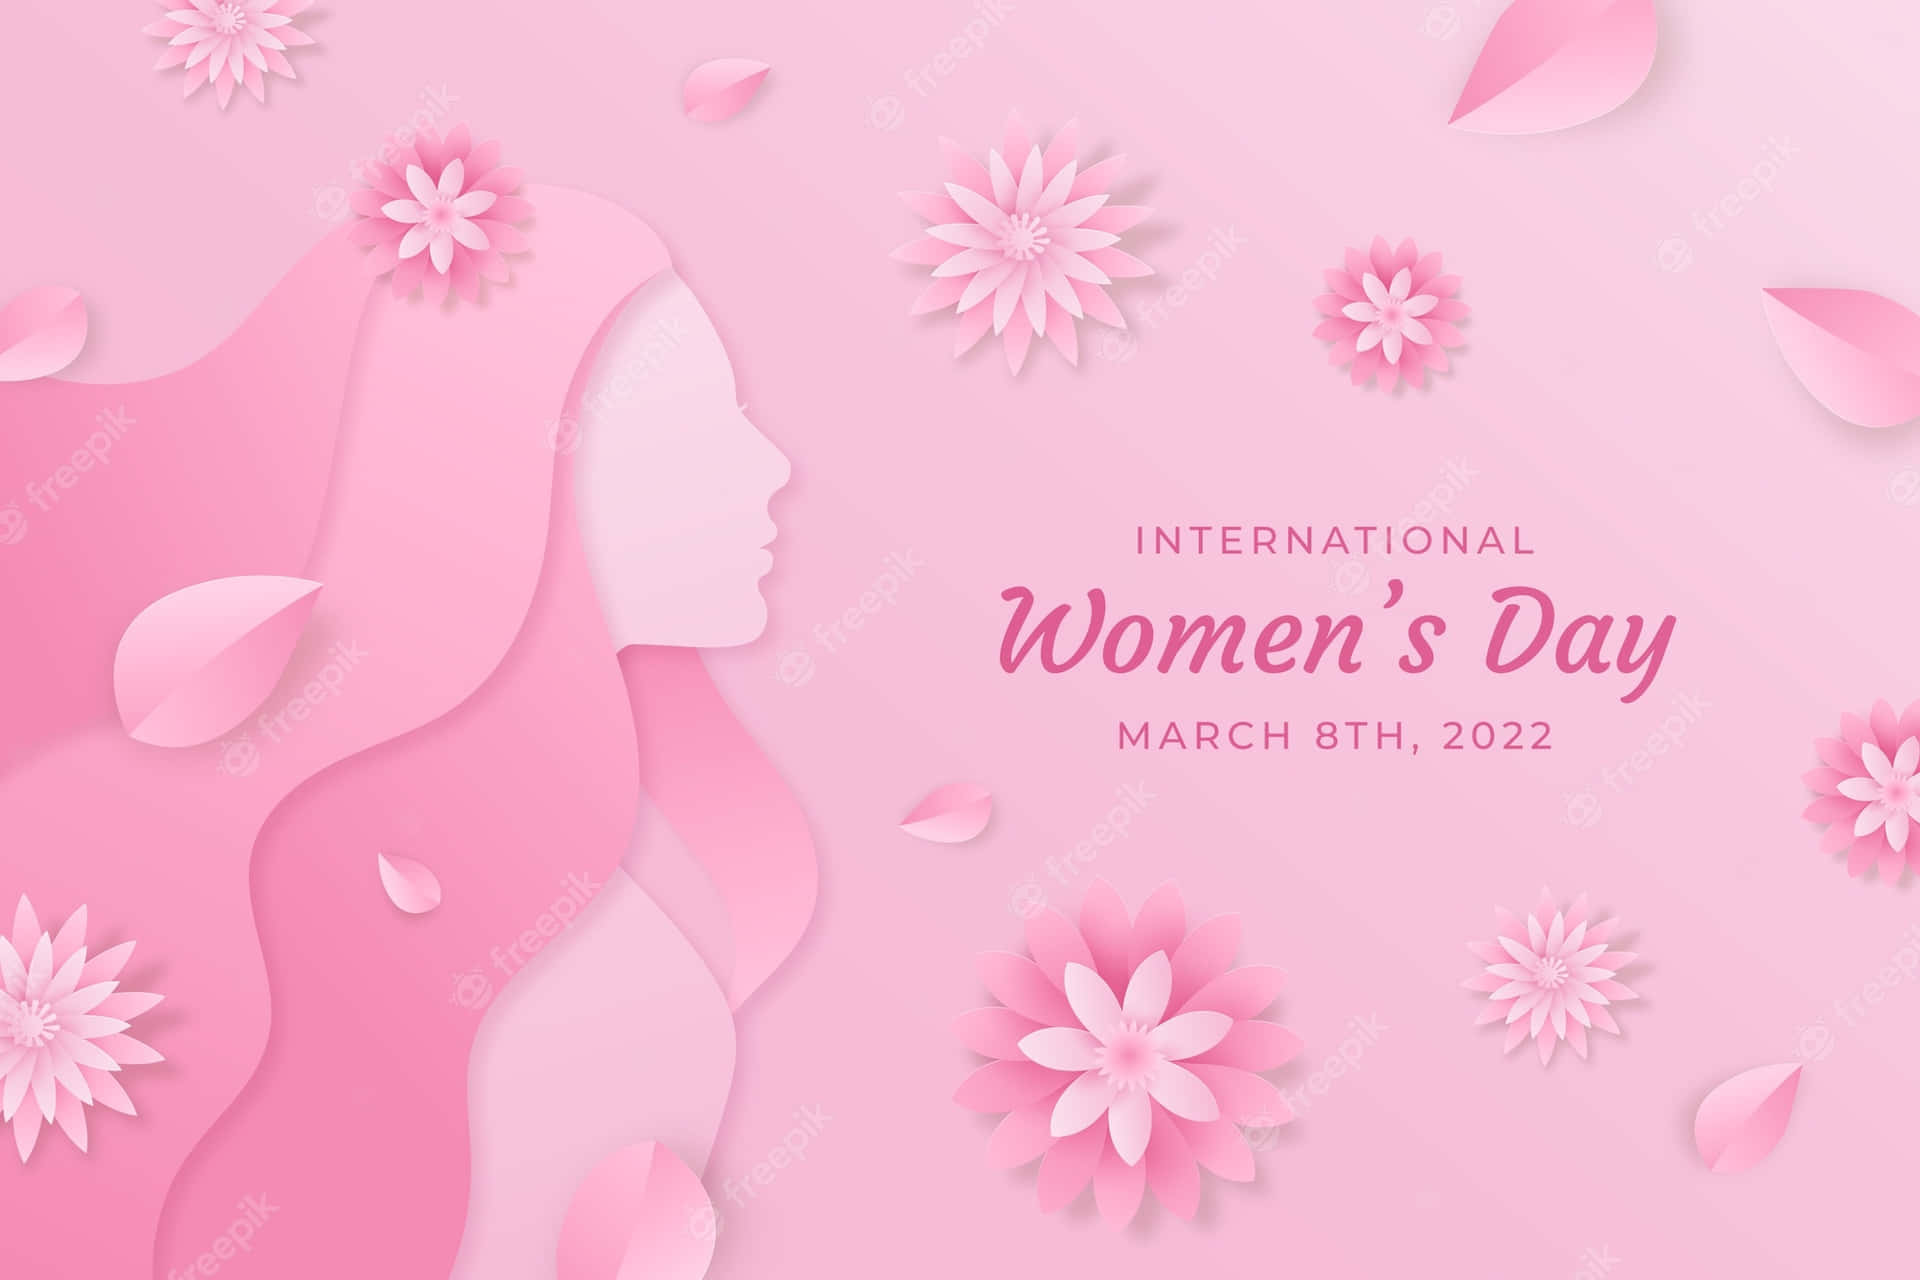 International Women's Day Background With A Woman's Face And Flowers